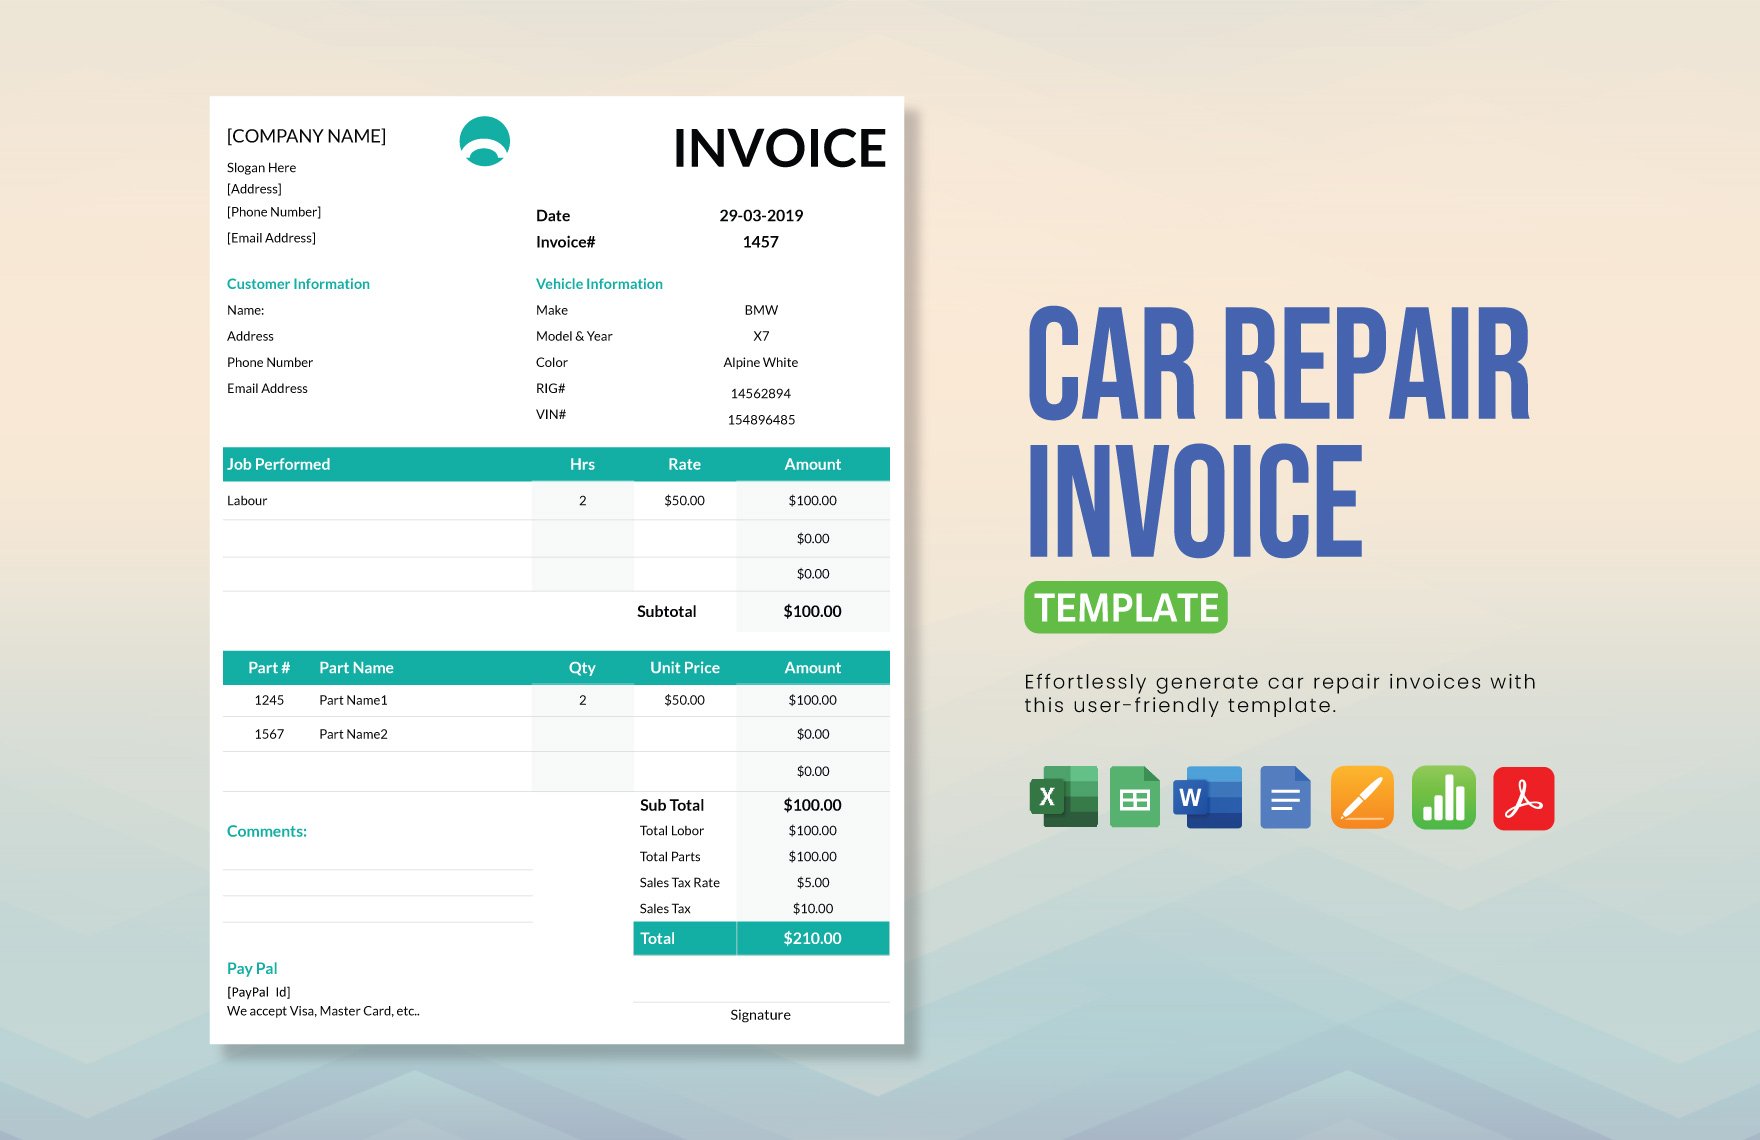 Car Repair Invoice Template in Word, Google Docs, Excel, PDF, Google Sheets, Apple Pages, Apple Numbers